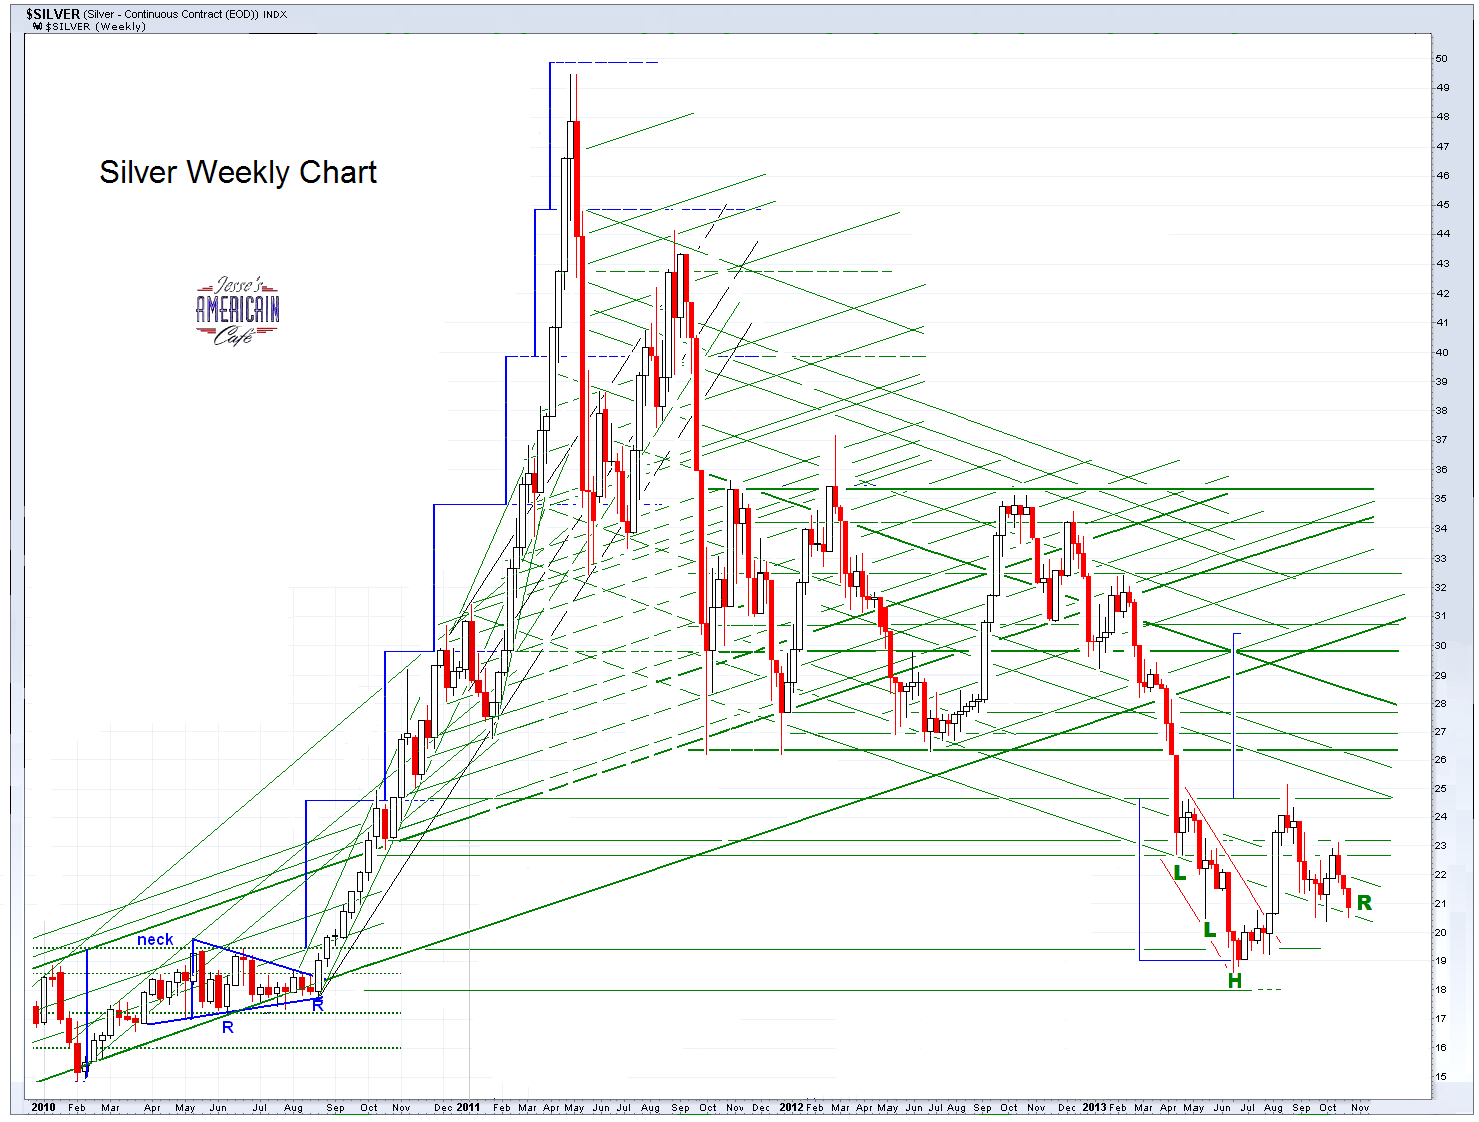 Jesse's Café Américain: Gold Daily and Silver Weekly Charts - Claims